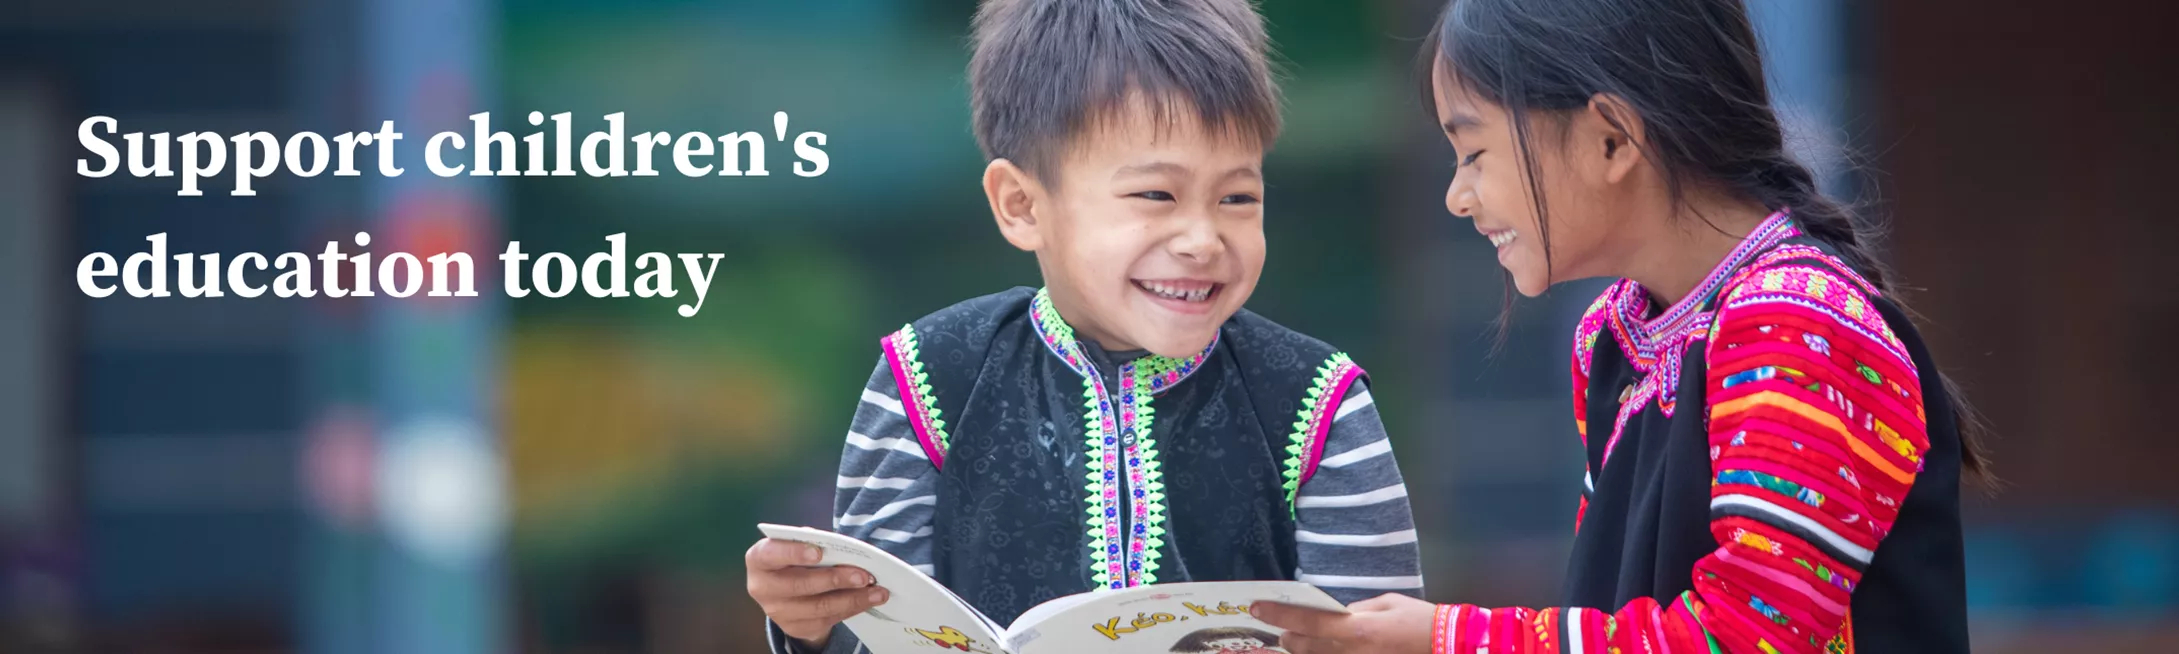 2 children in Cambodia laughing as they read a book with text overlay that says "Support children's education today"